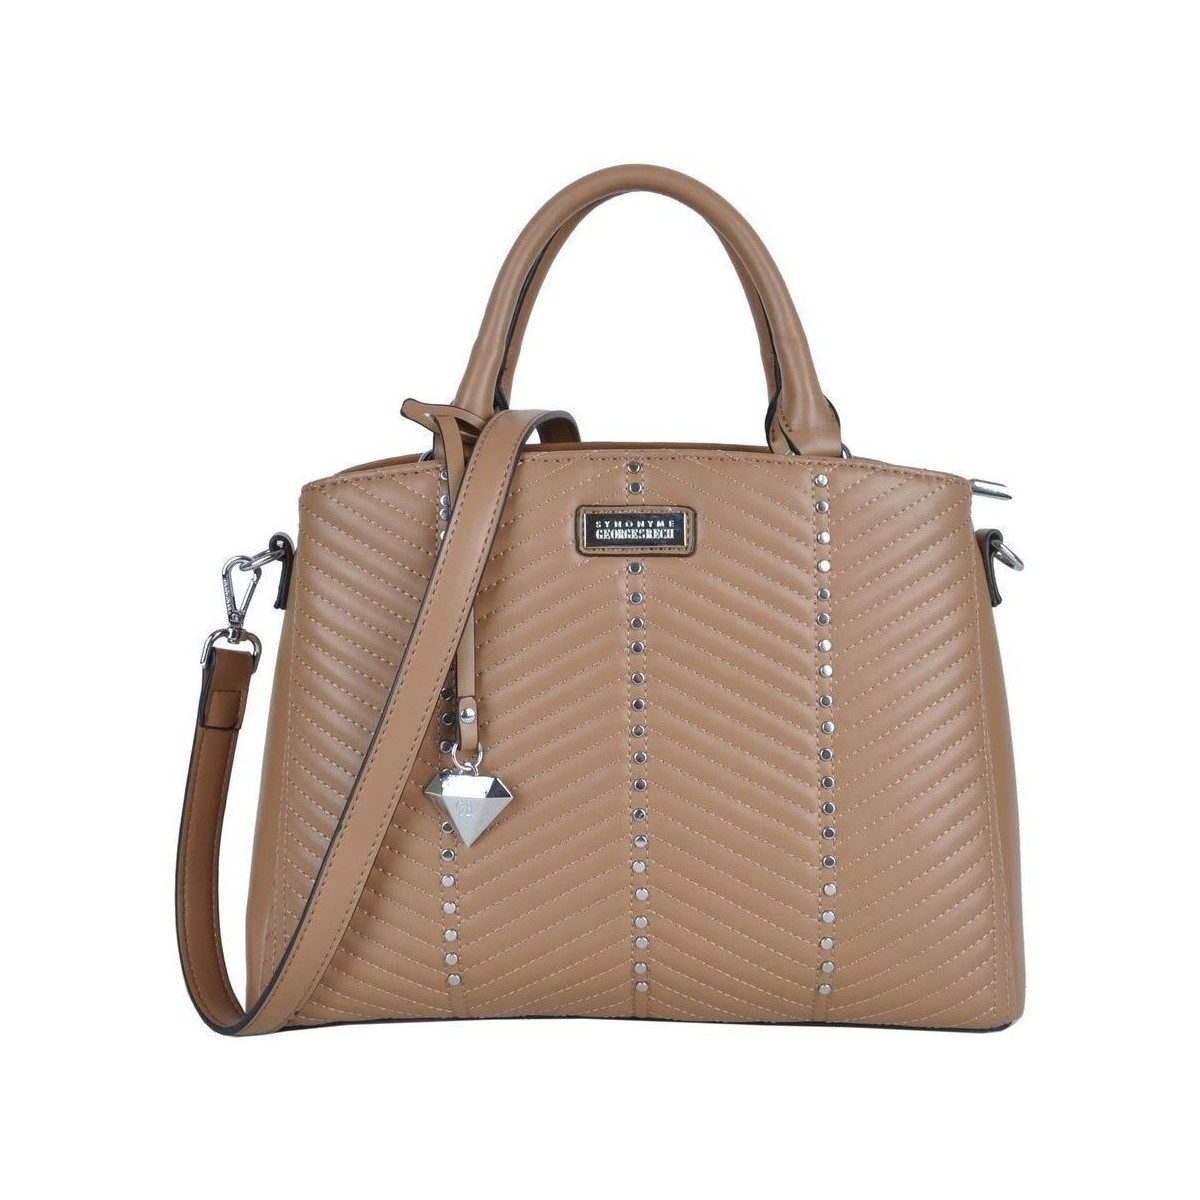 Shopping bag Georges Rech STEPHIE